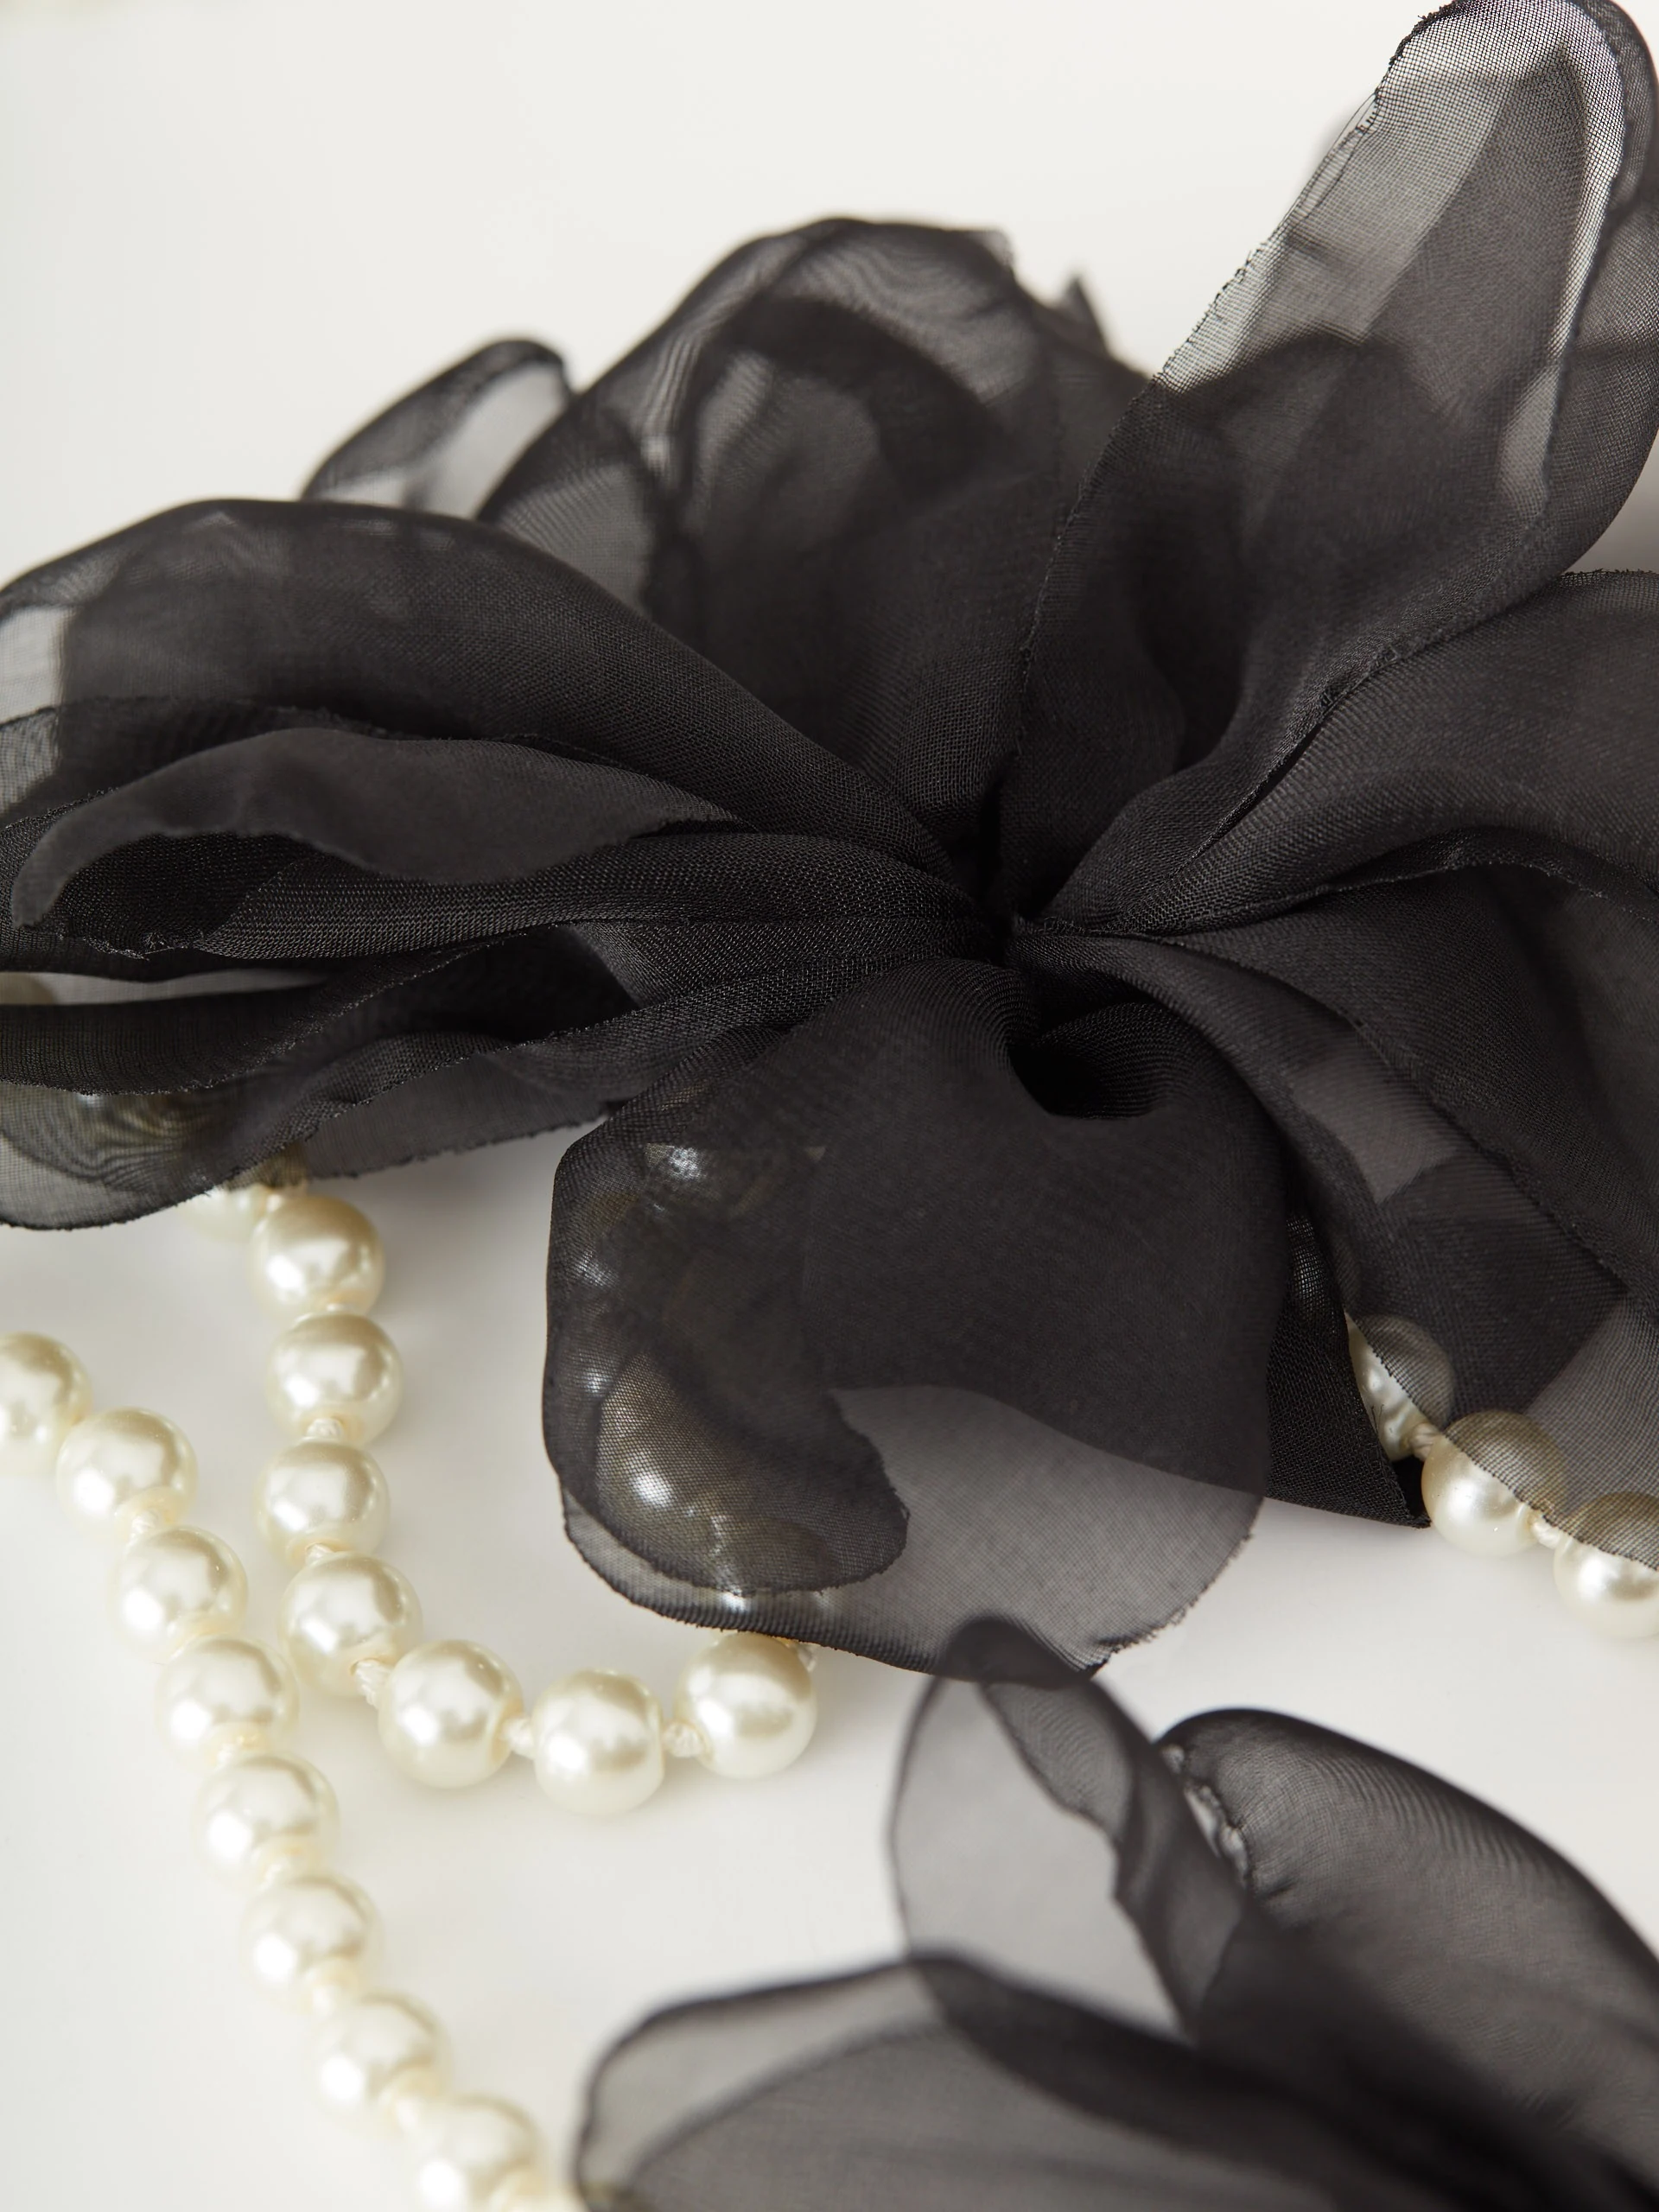 Pearl necklace with decorative flowers